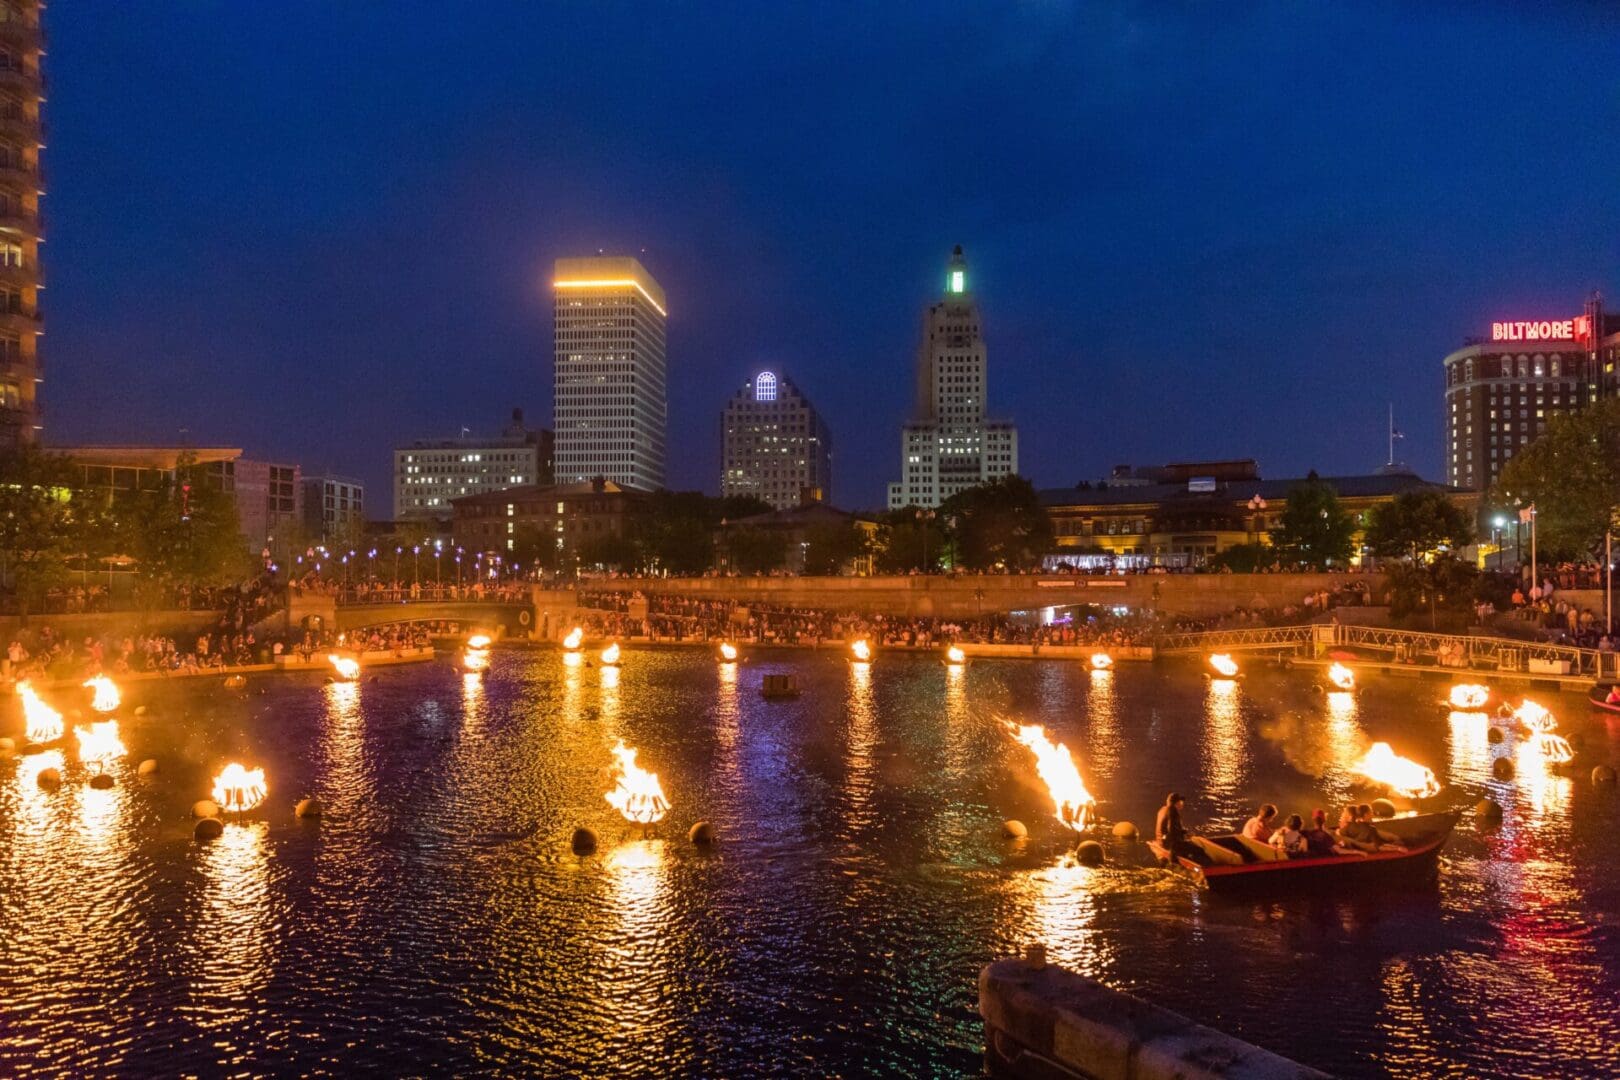 2018-5-26 A Fully Lit Basin During the First Full WaterFire Lighting of 2018 (Photograph by Matthew Huang)